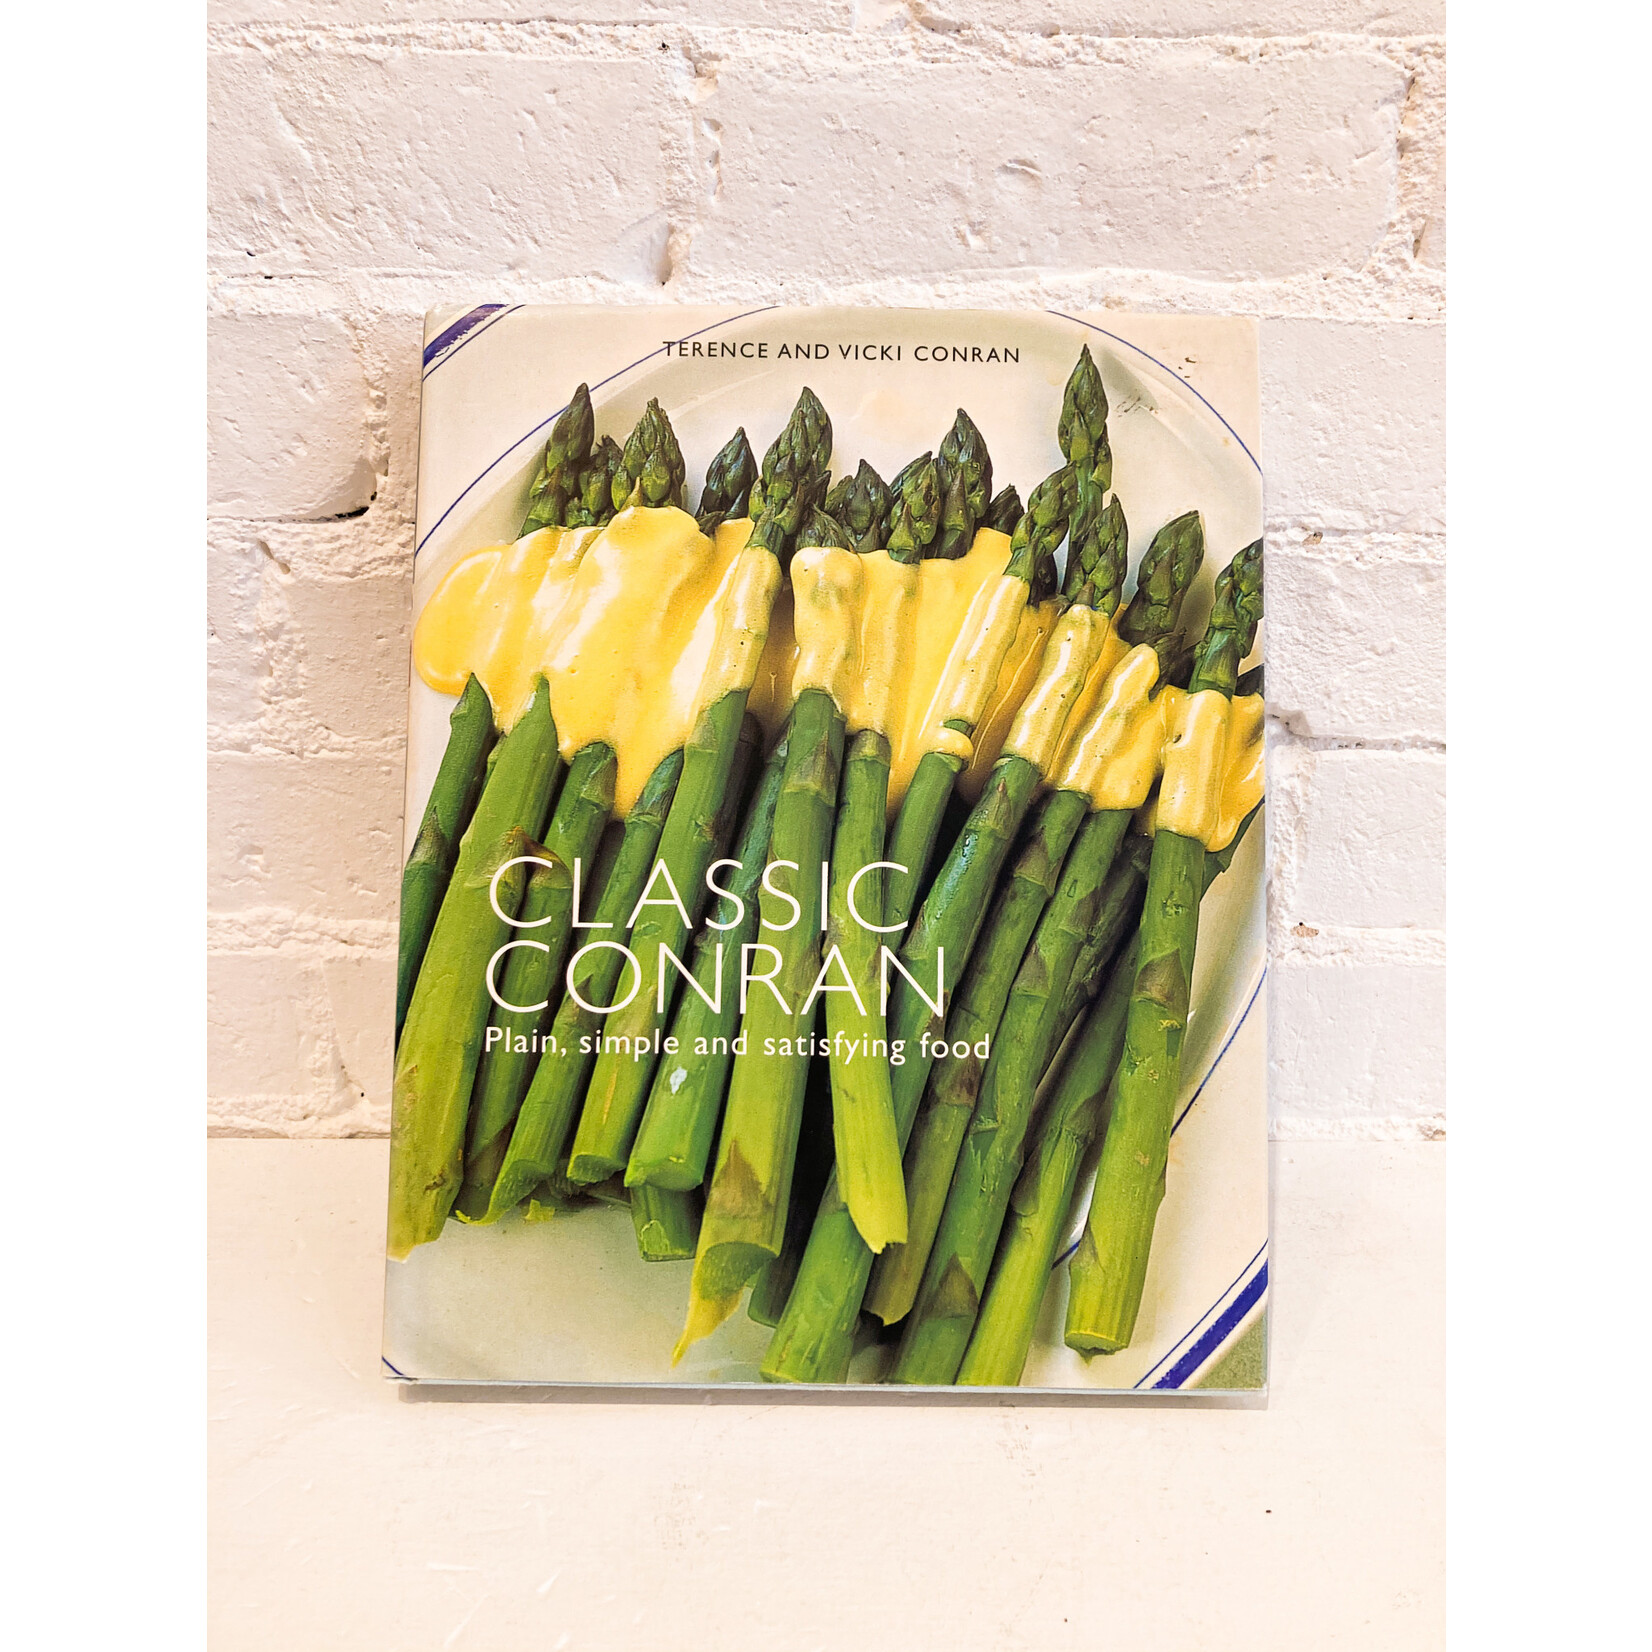 Classic Conran: Plain, Simple and Satisfying Food by Terence and Vicki Conran